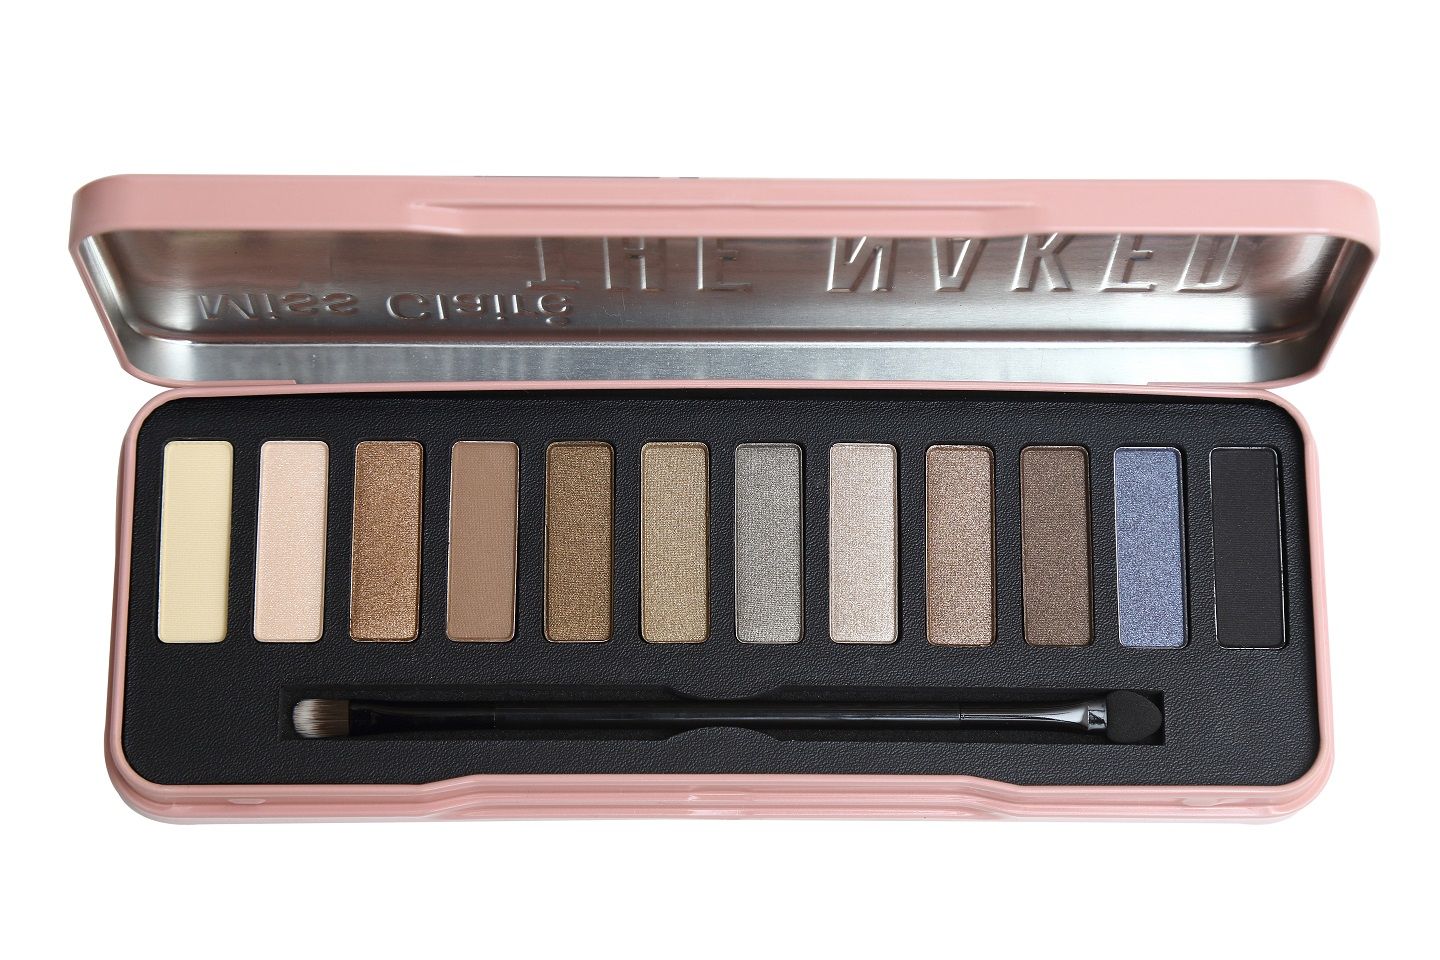 Miss Claire The Naked Natural Nudes Eye Color Palette - 1